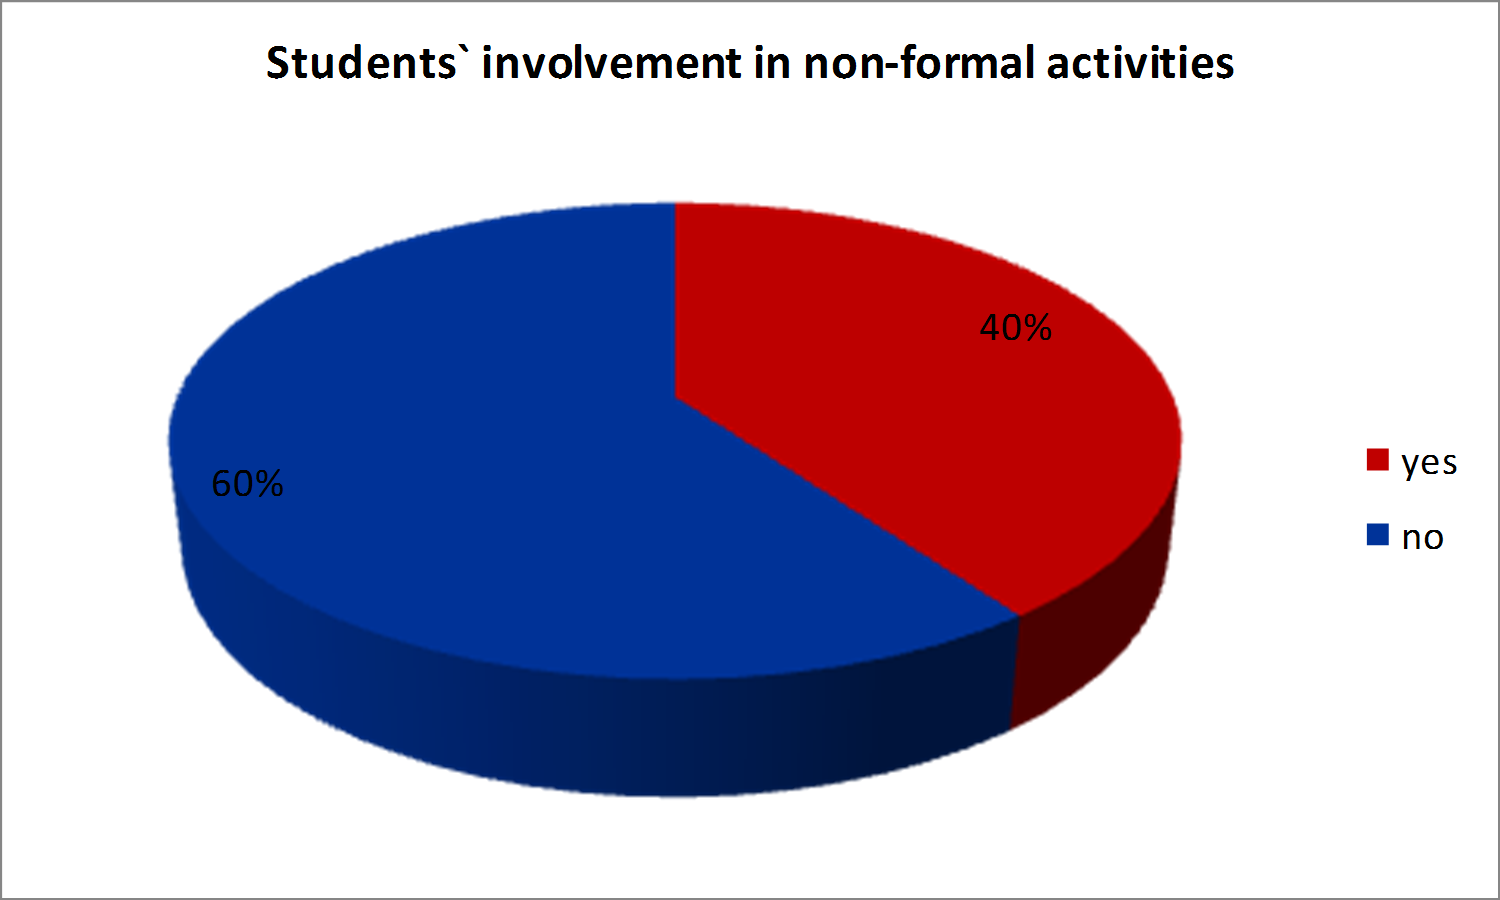 Previous participation of questioned students in non-formal education activities